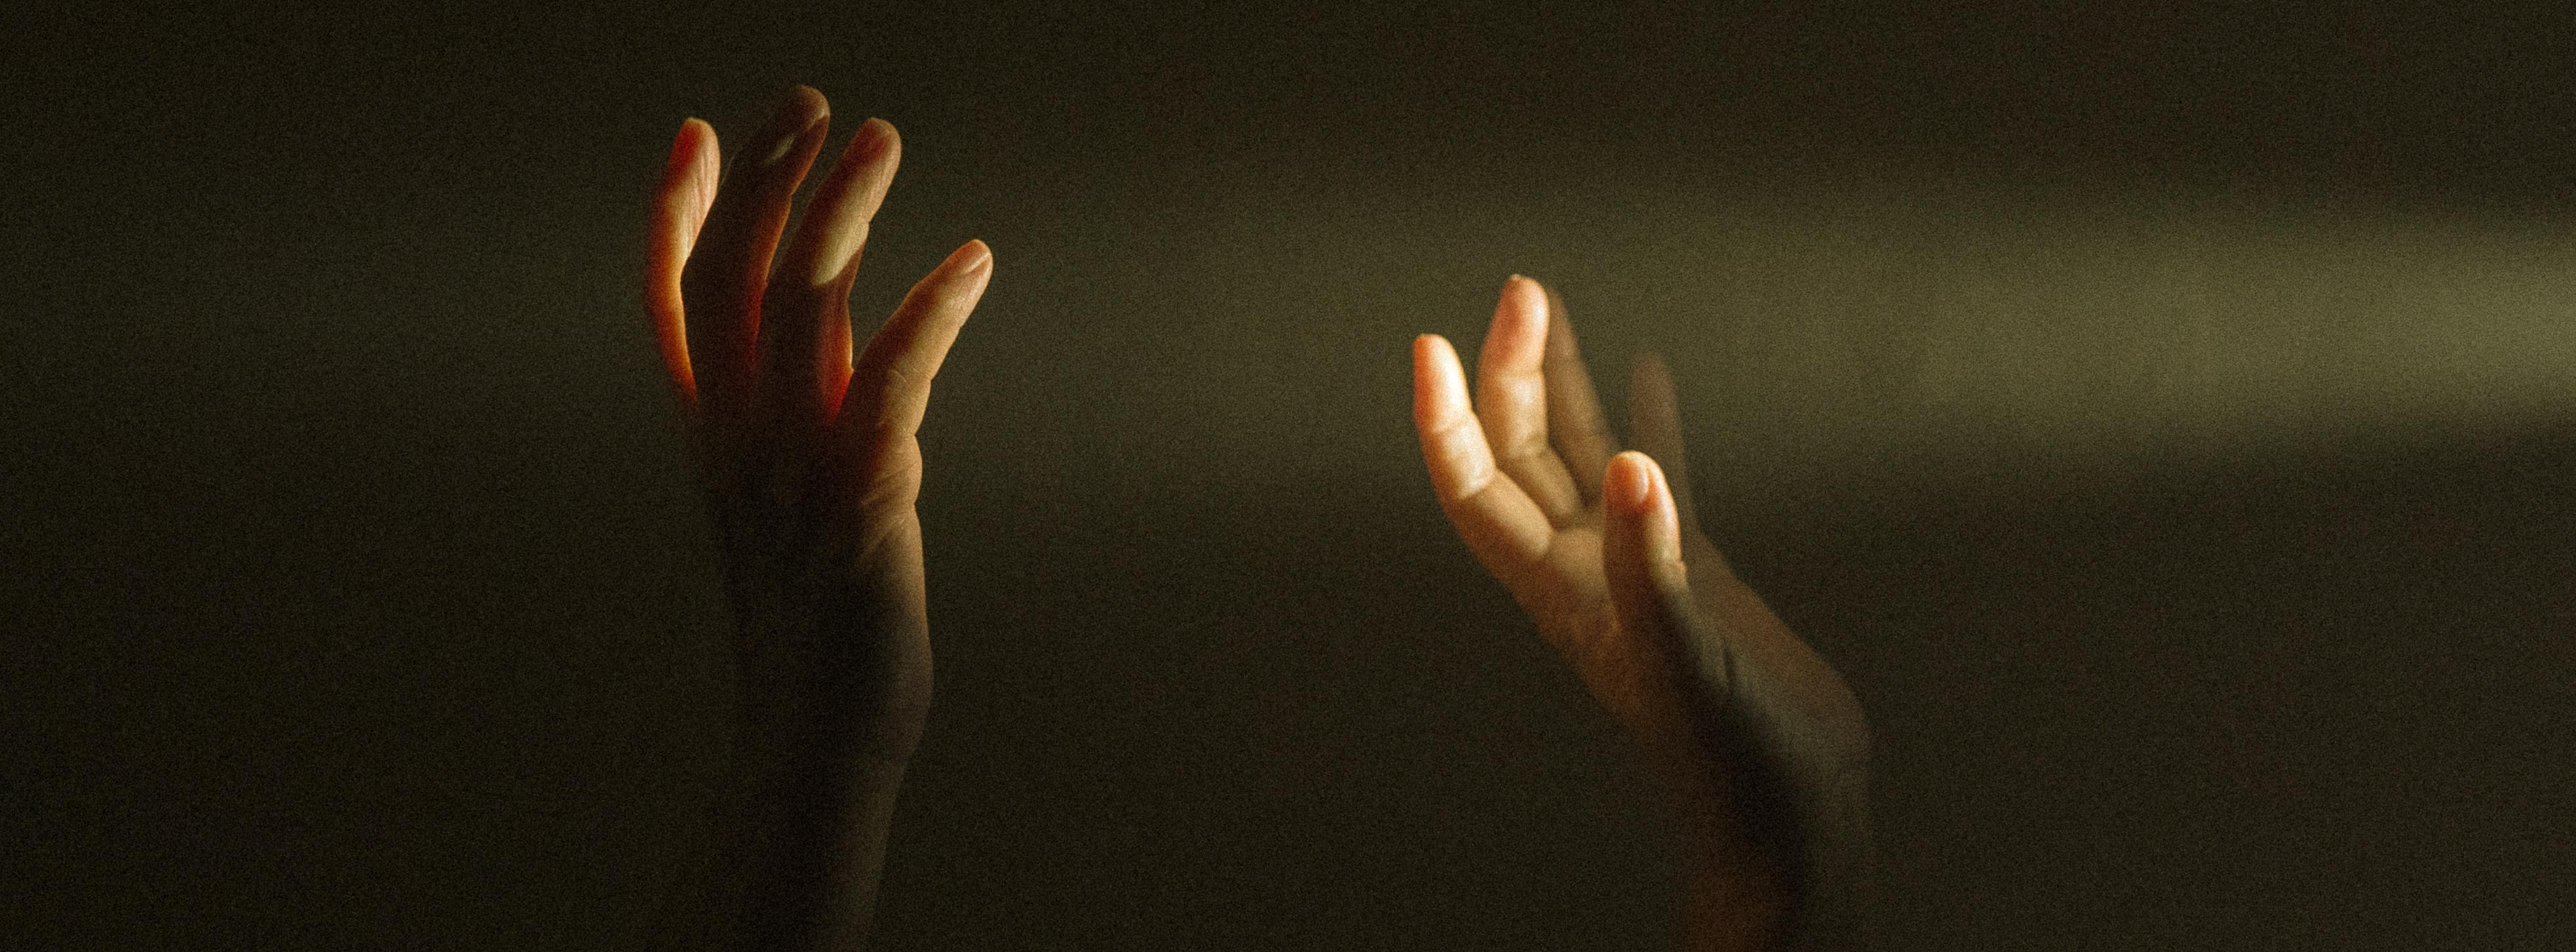 Persons raising hands in darkness